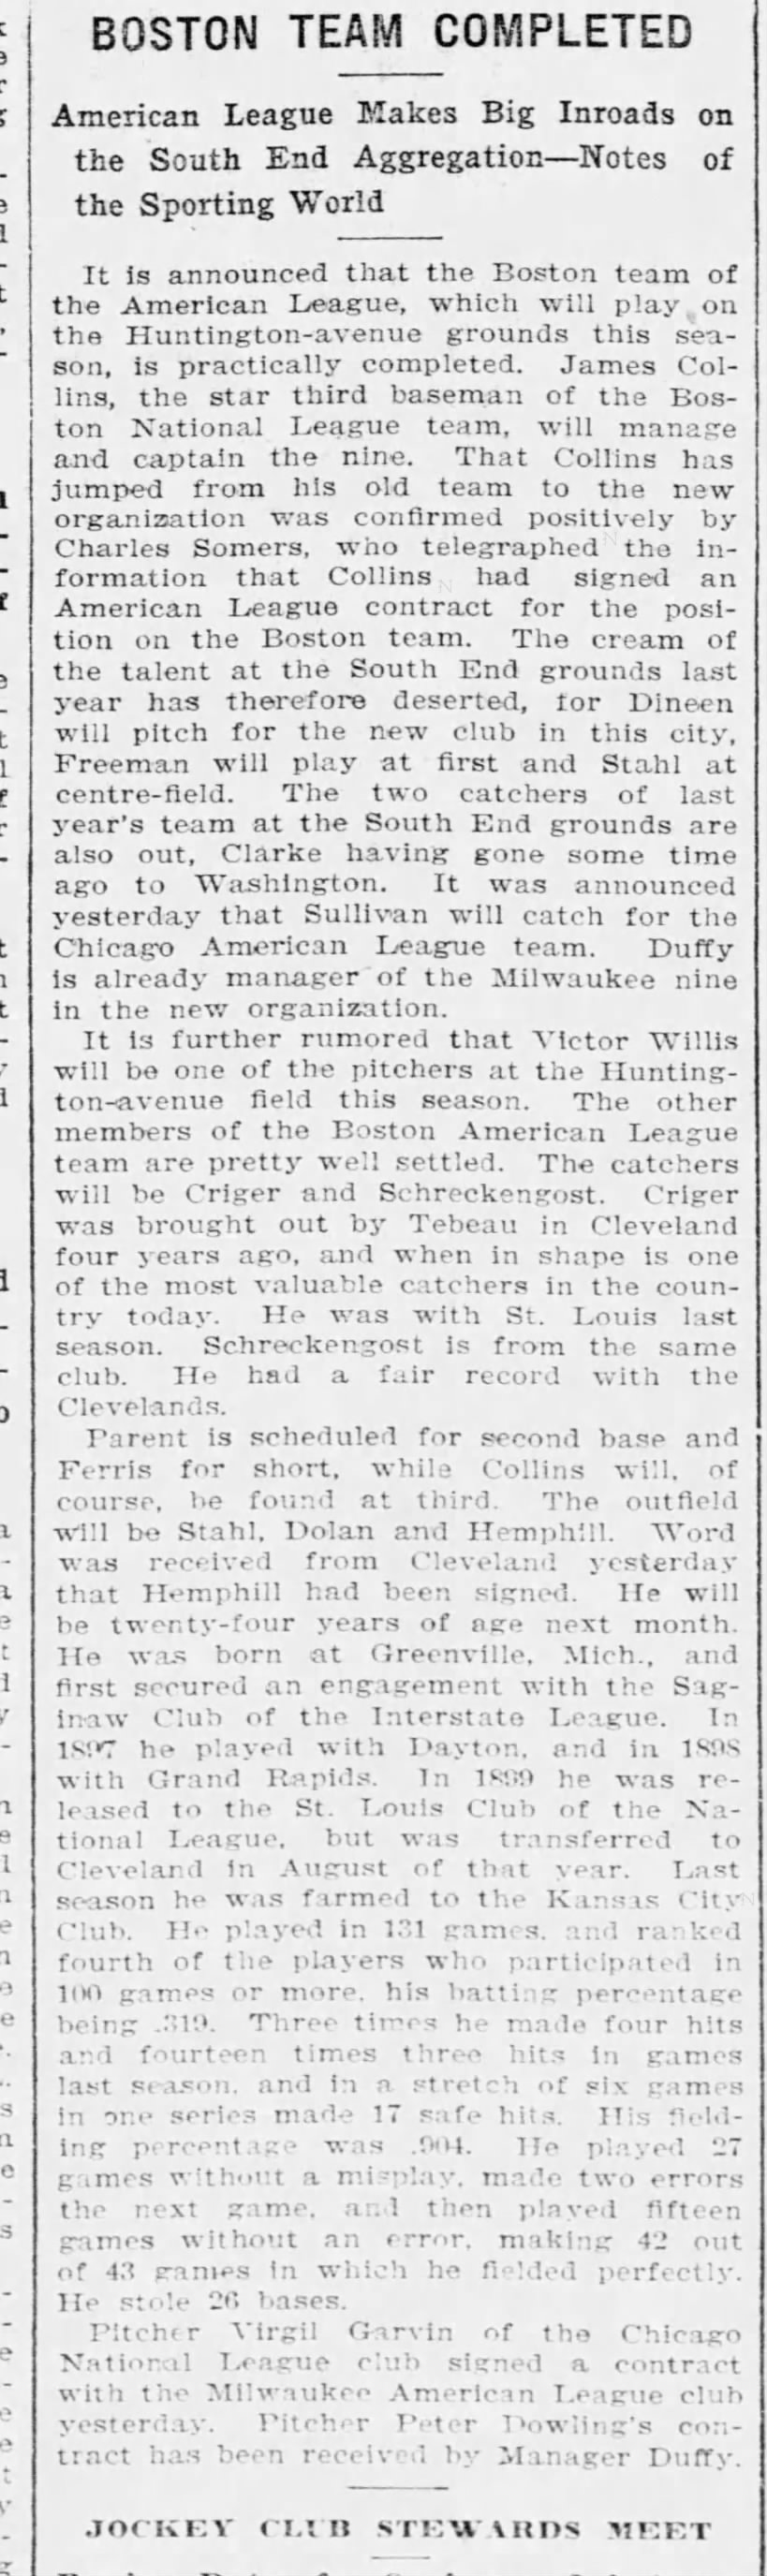 Beaneaters leave for American League